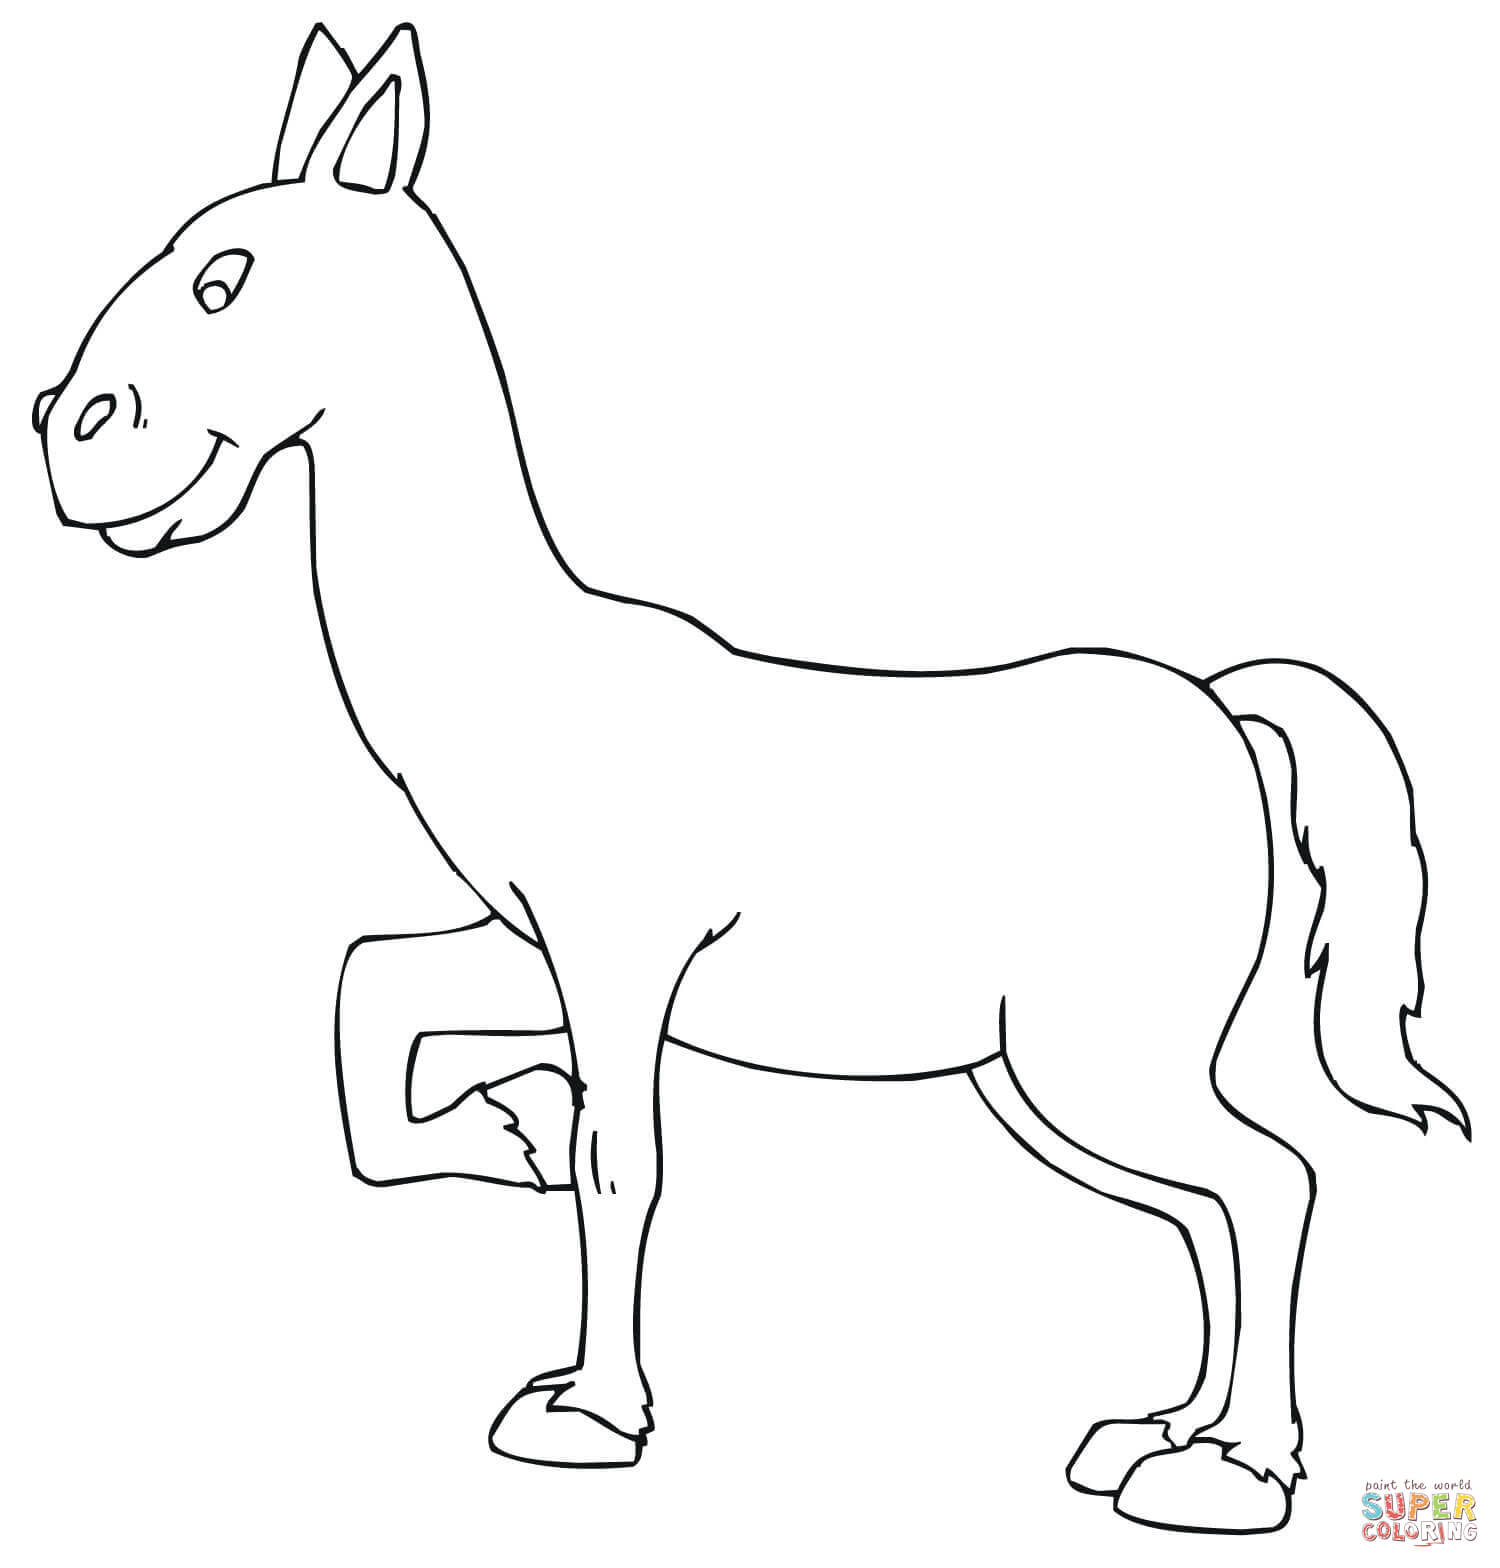 Donkey Coloring Page Donkeys Coloring Pages Free Coloring Pages